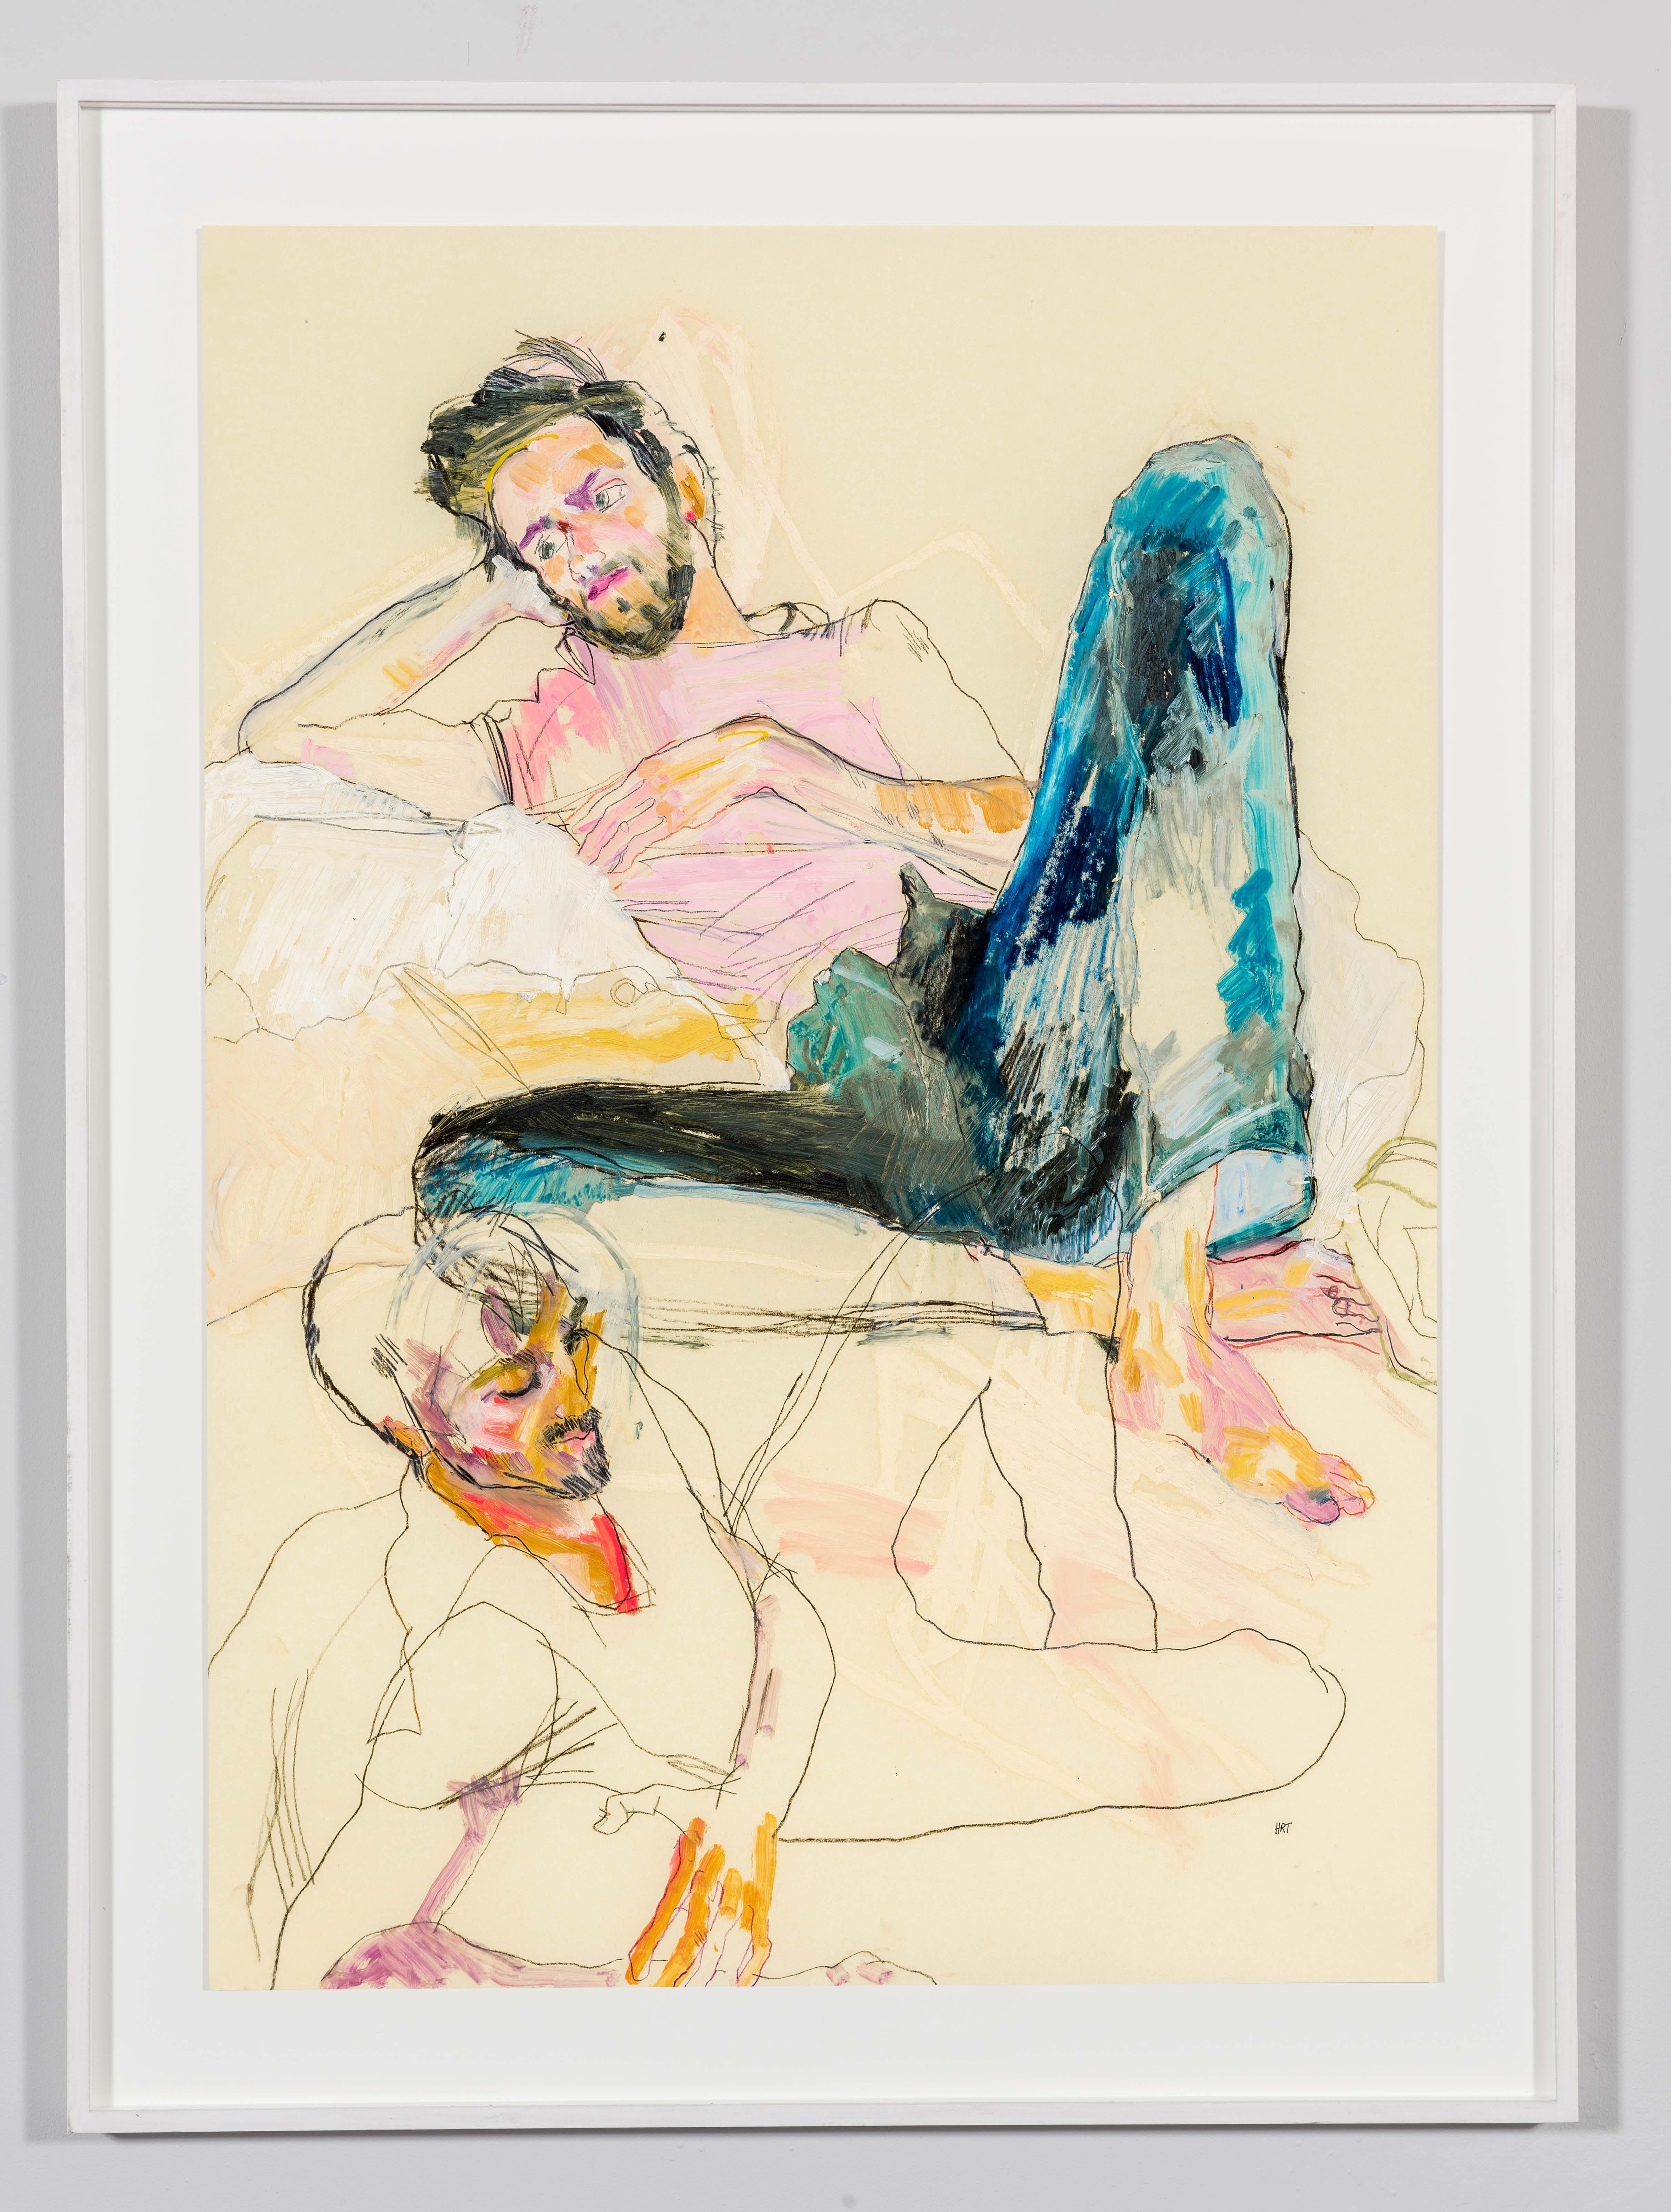 Giorgio (Two figures, pink & blue), Mixed media on Pergameneta parchment - Art by Howard Tangye